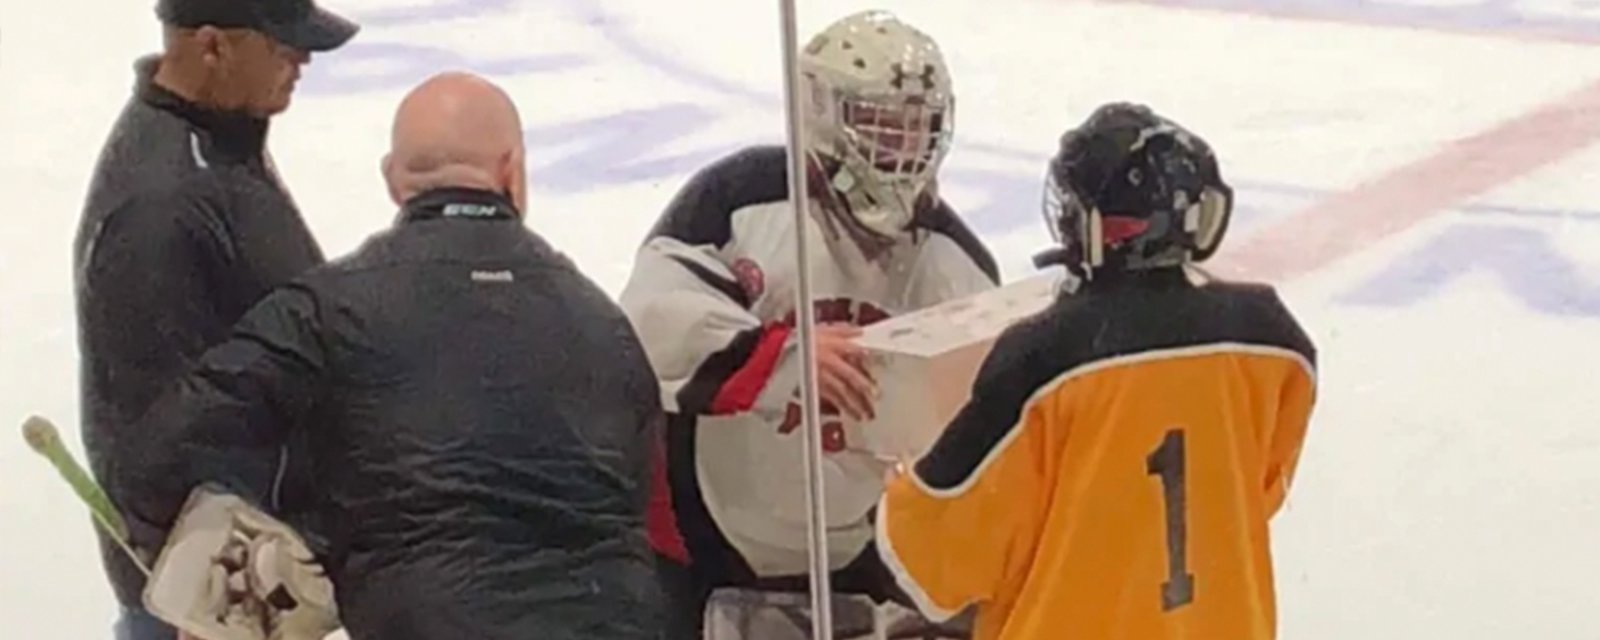 12-year-old goalie battling cancer gets special gift from opponents